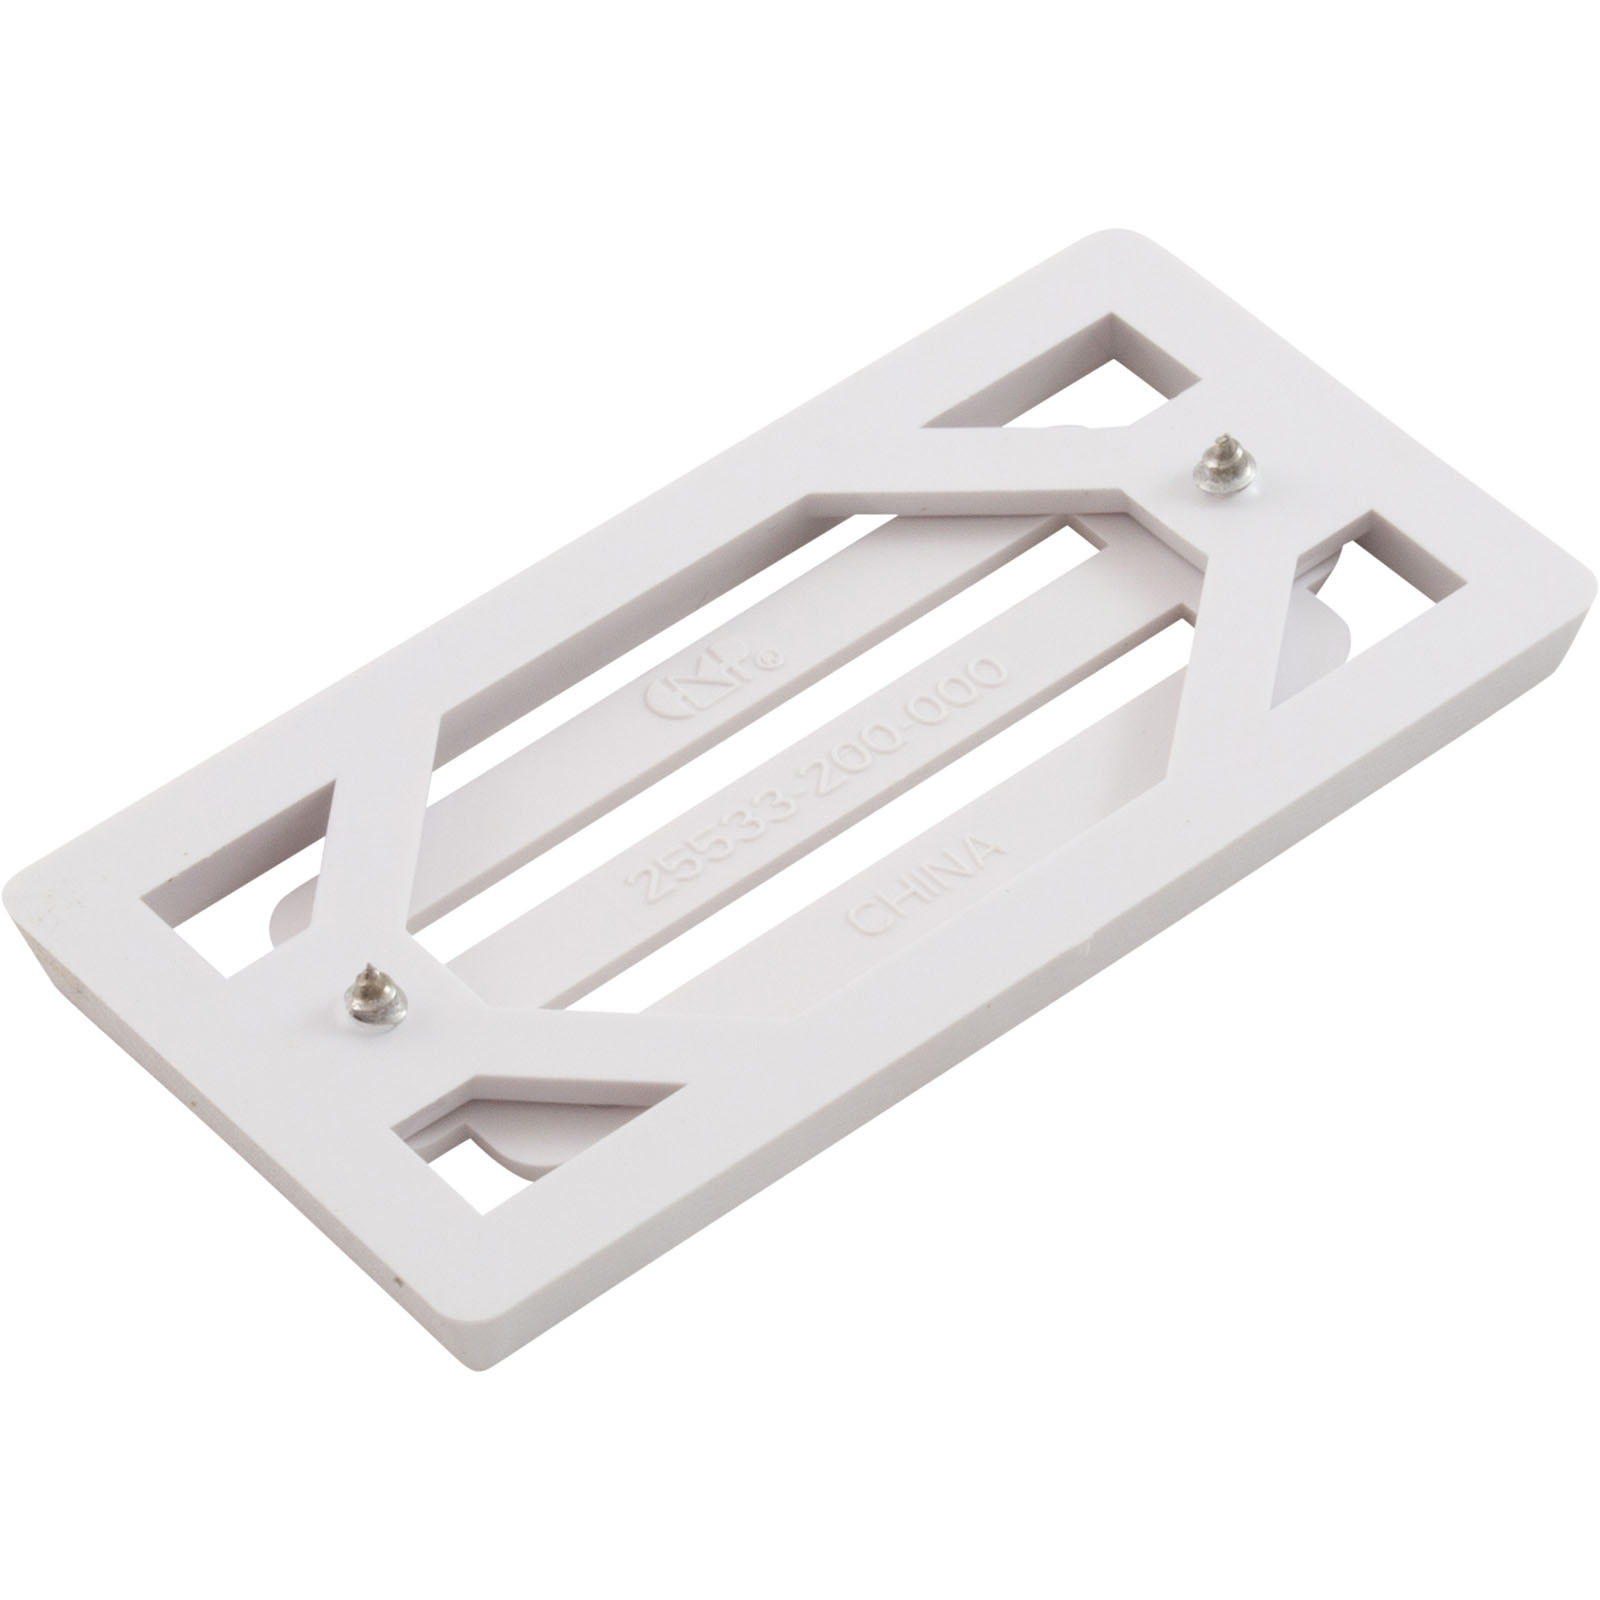 Picture of 3 Bar Grate And Frame Assembly, White